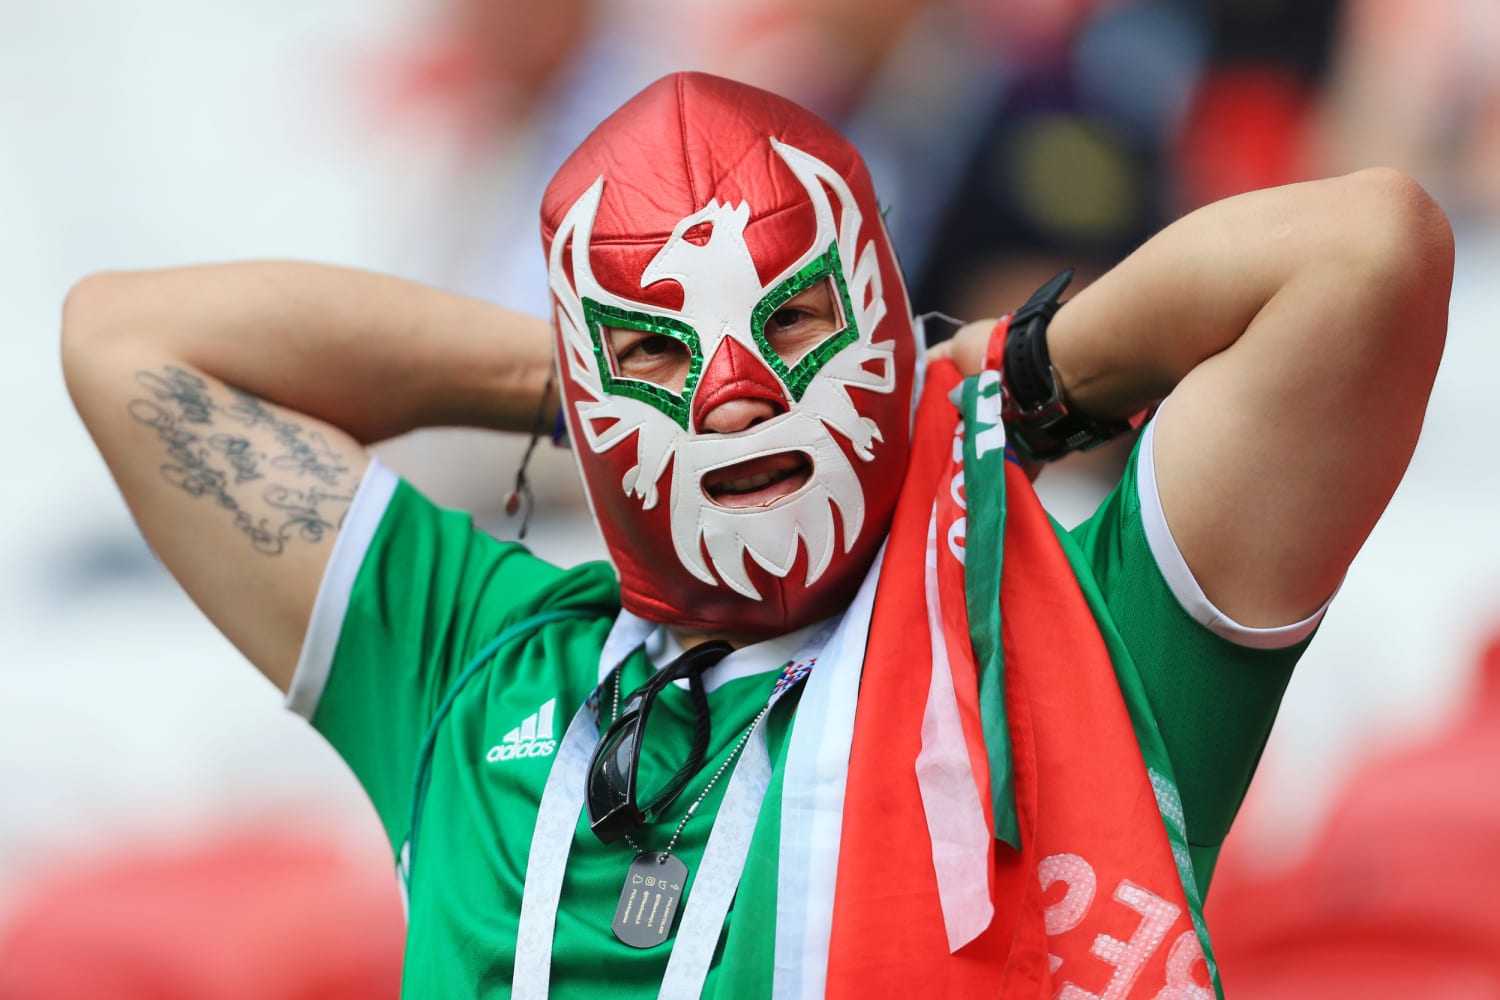 advises fans not to wear Lucha Libre masks to World Cup